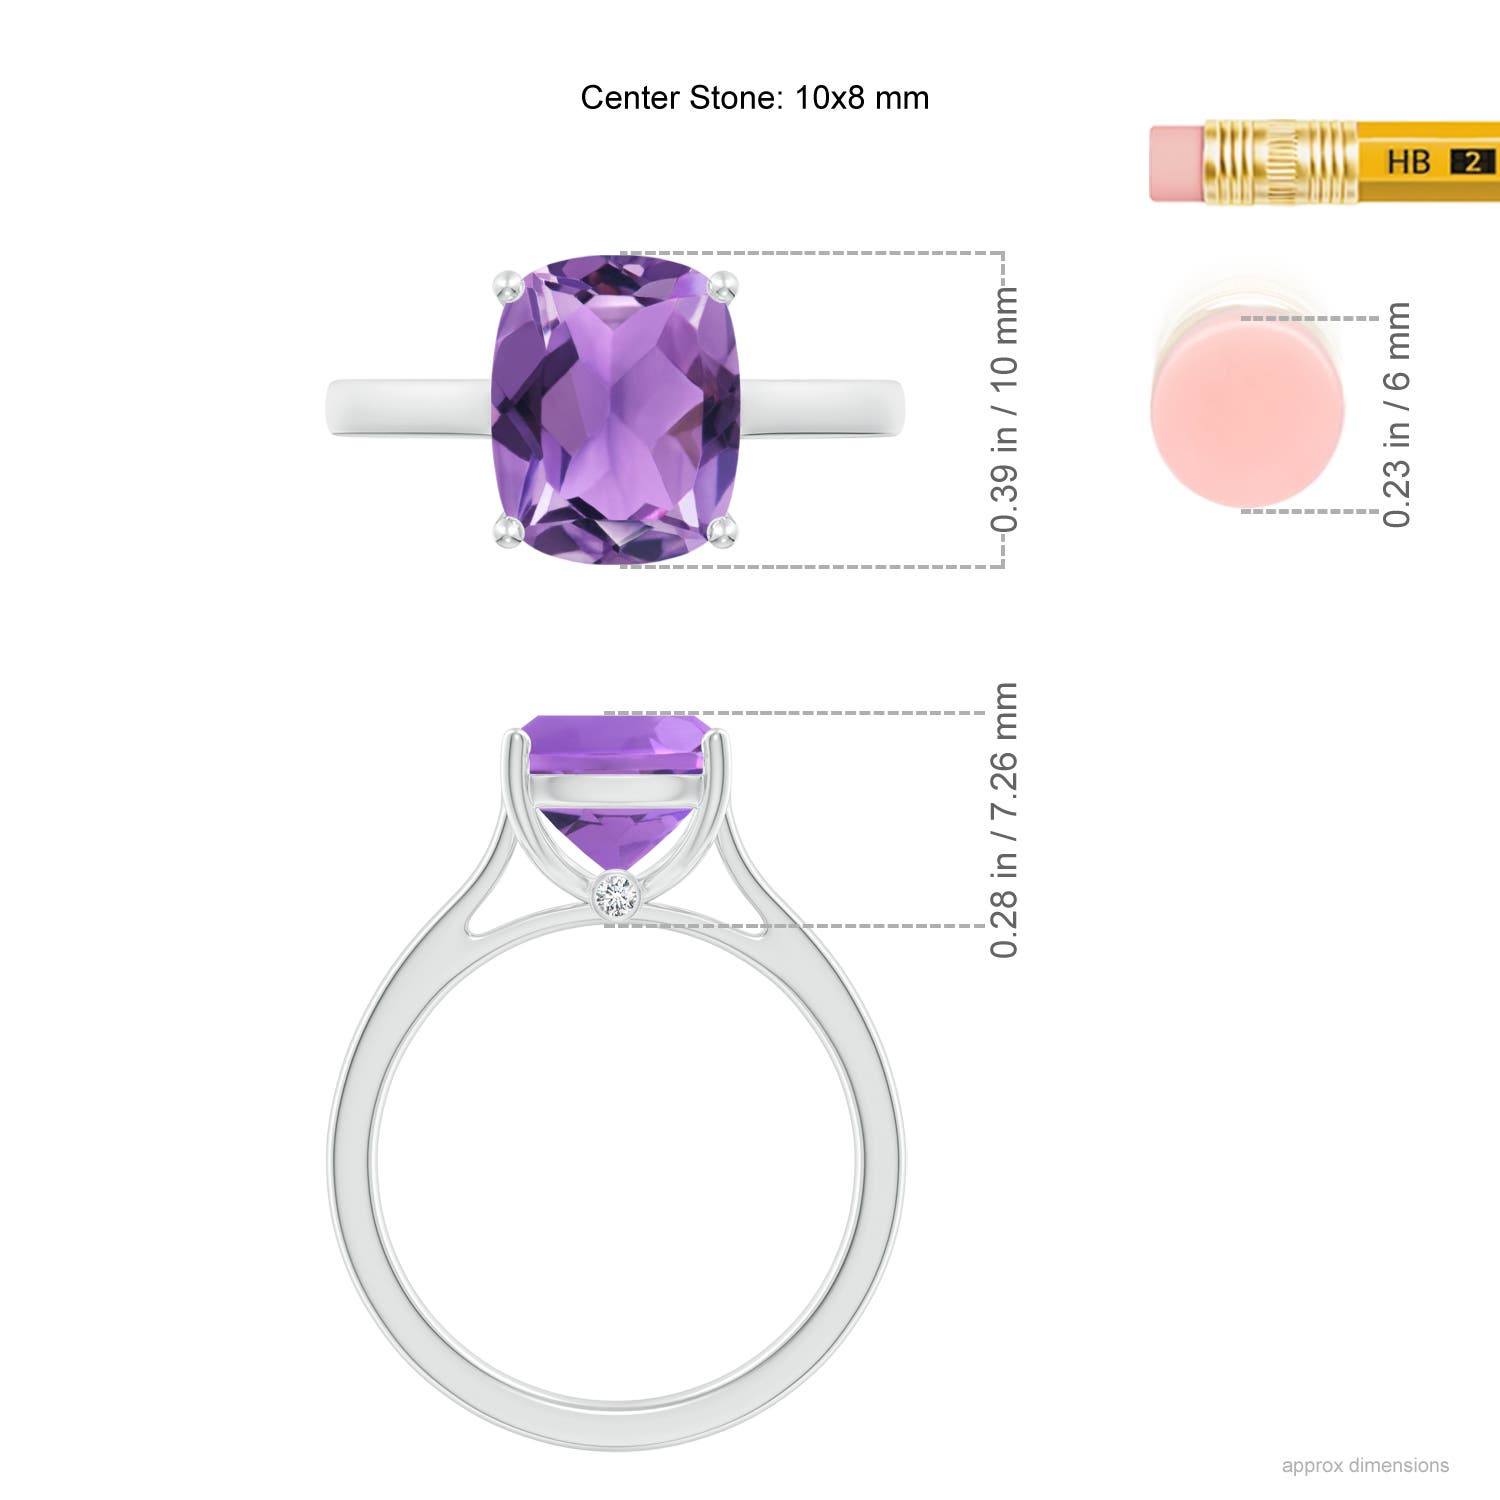 AA - Amethyst / 2.72 CT / 14 KT White Gold